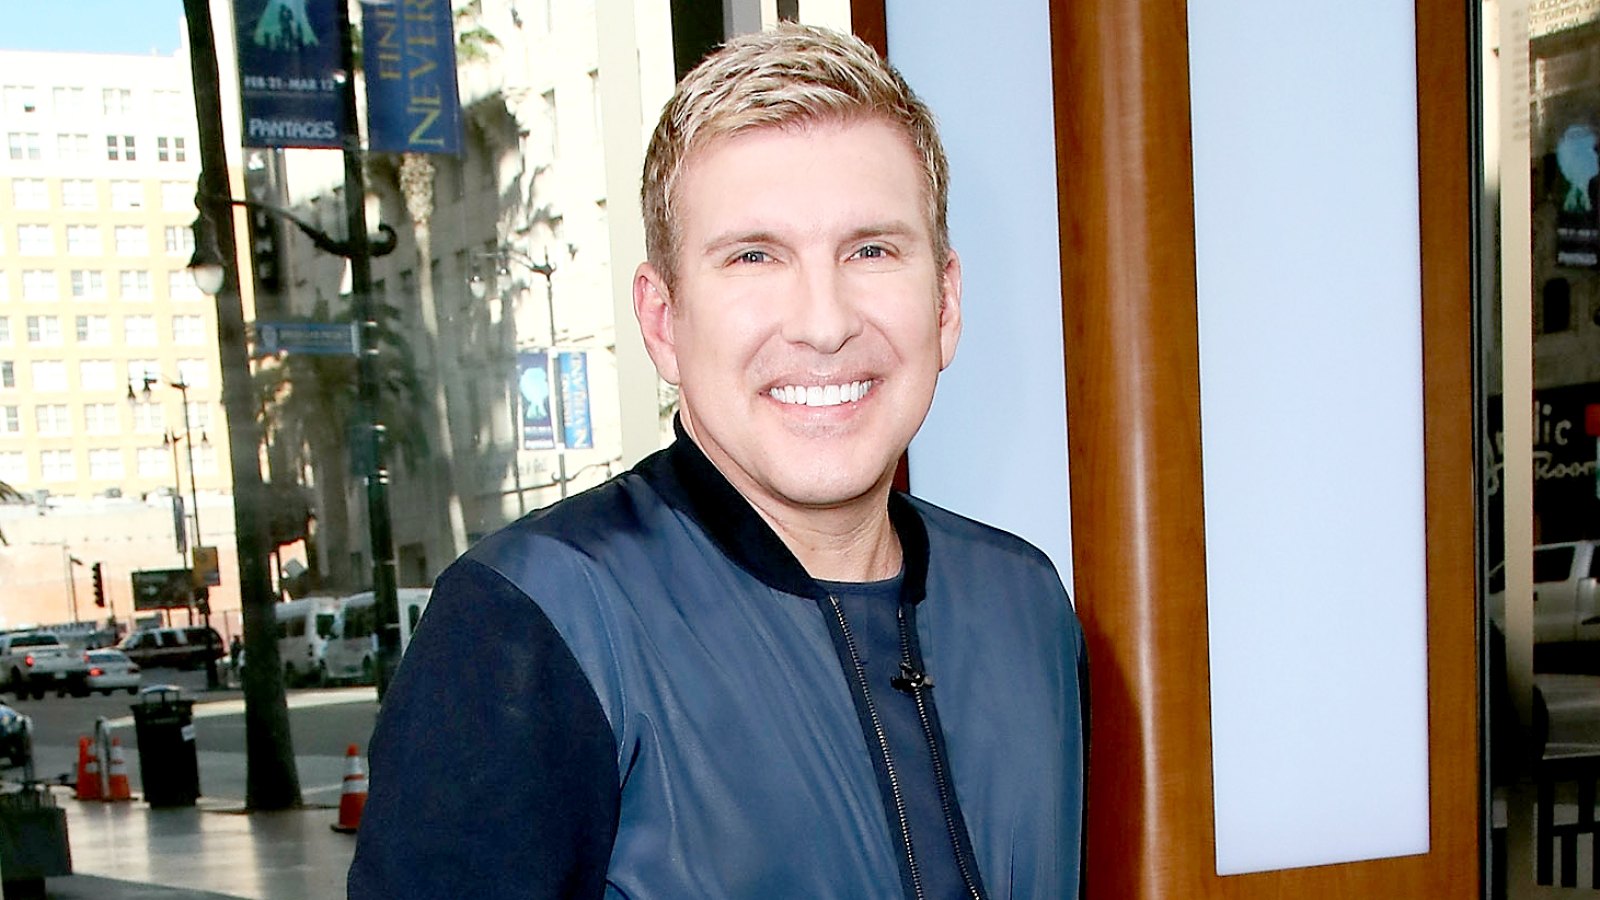 Todd Chrisley visits Hollywood Today Live at W Hollywood on February 24, 2017 in Hollywood, California.